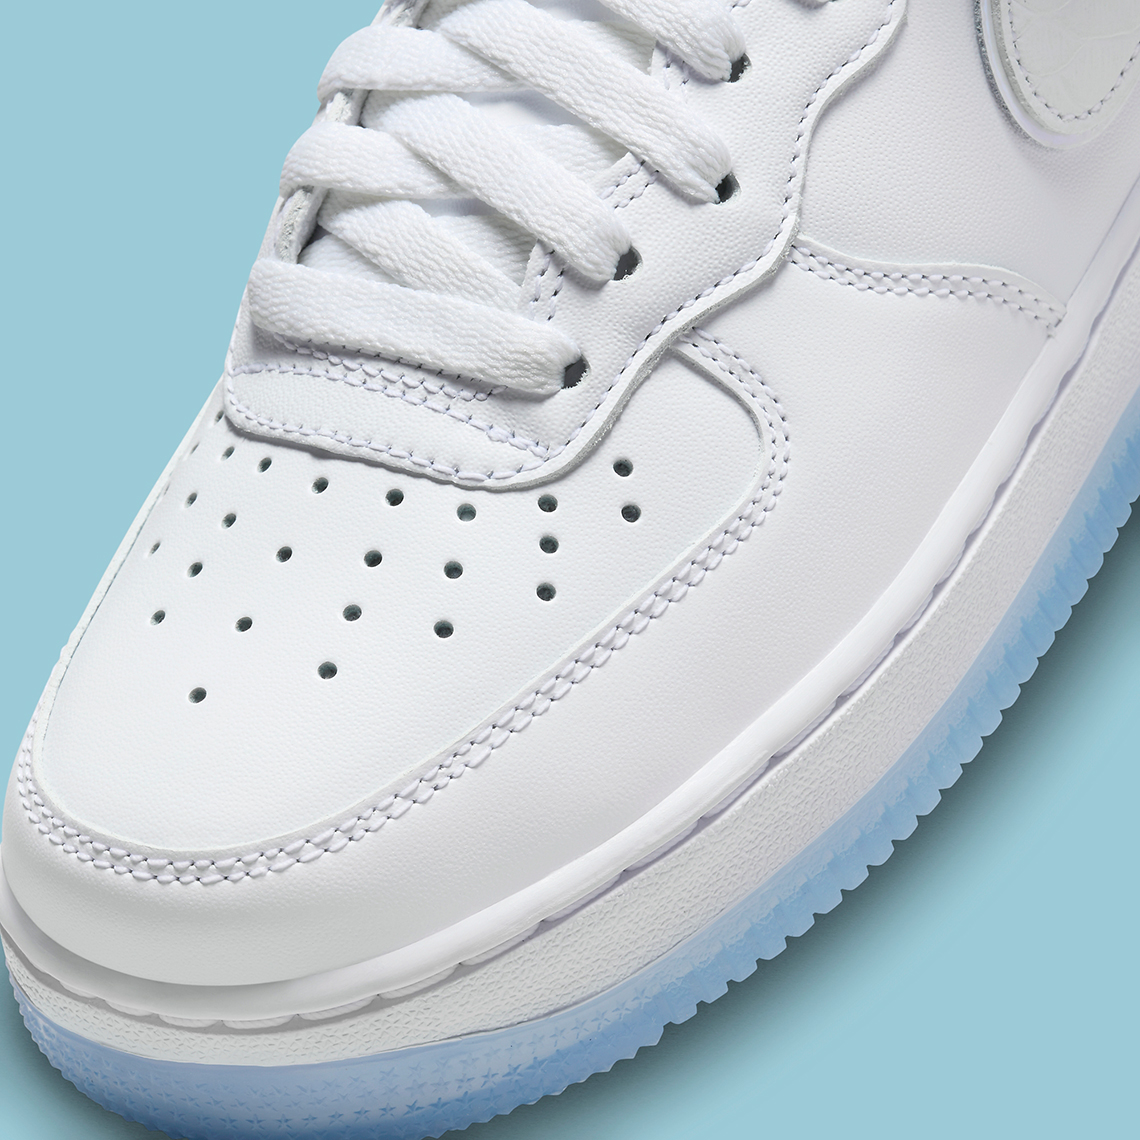 Reminder that he doesnt have access to Nike tech White Crocskin Icy Soles Fn4274 100 7